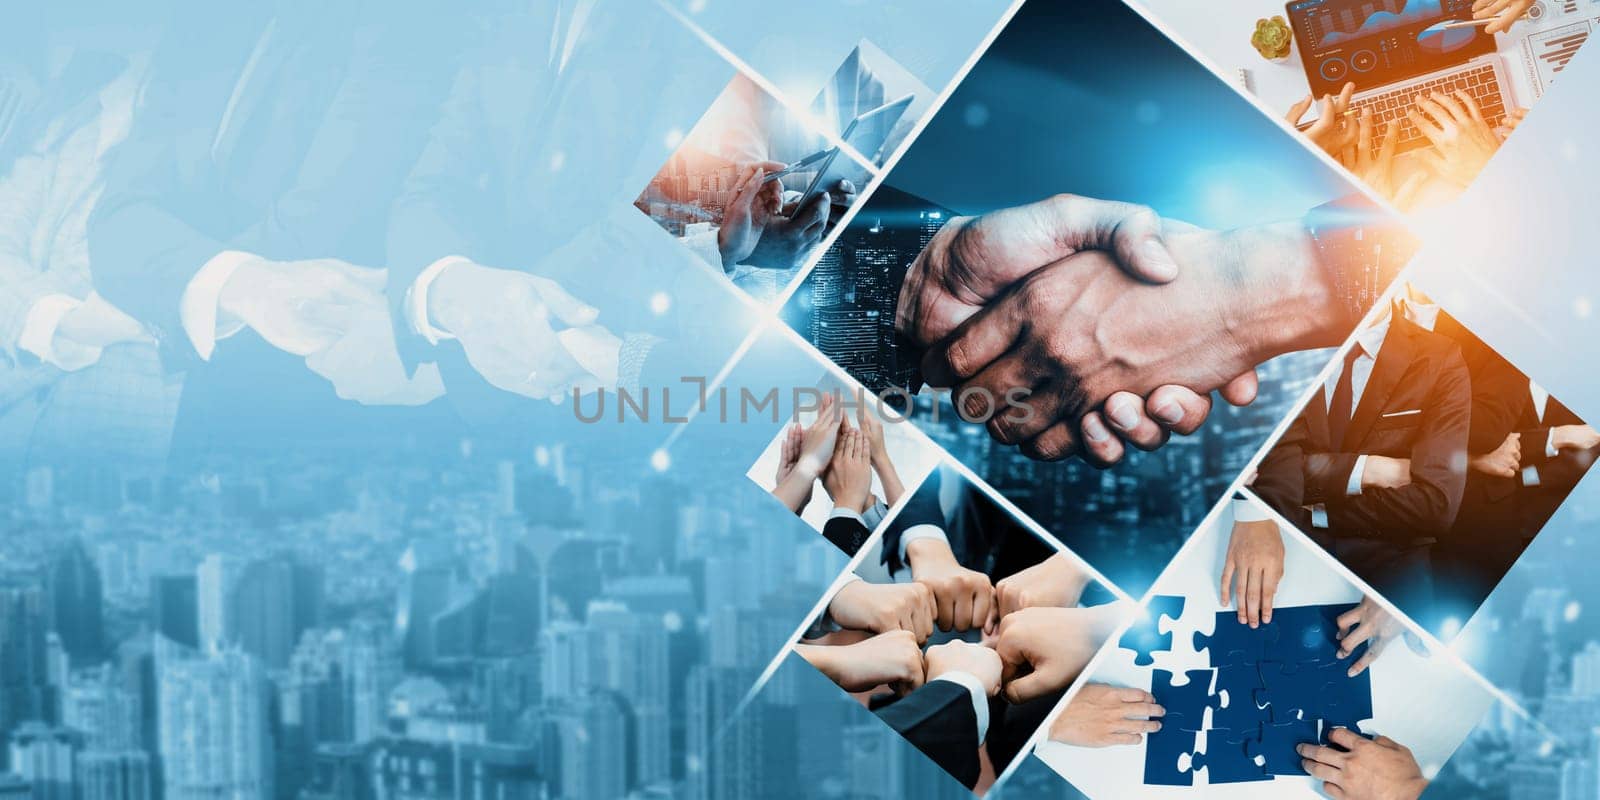 Teamwork and human resources HR management technology concept in corporate business with people group networking to support partnership, trust, teamwork and unity of coworkers in office kudos